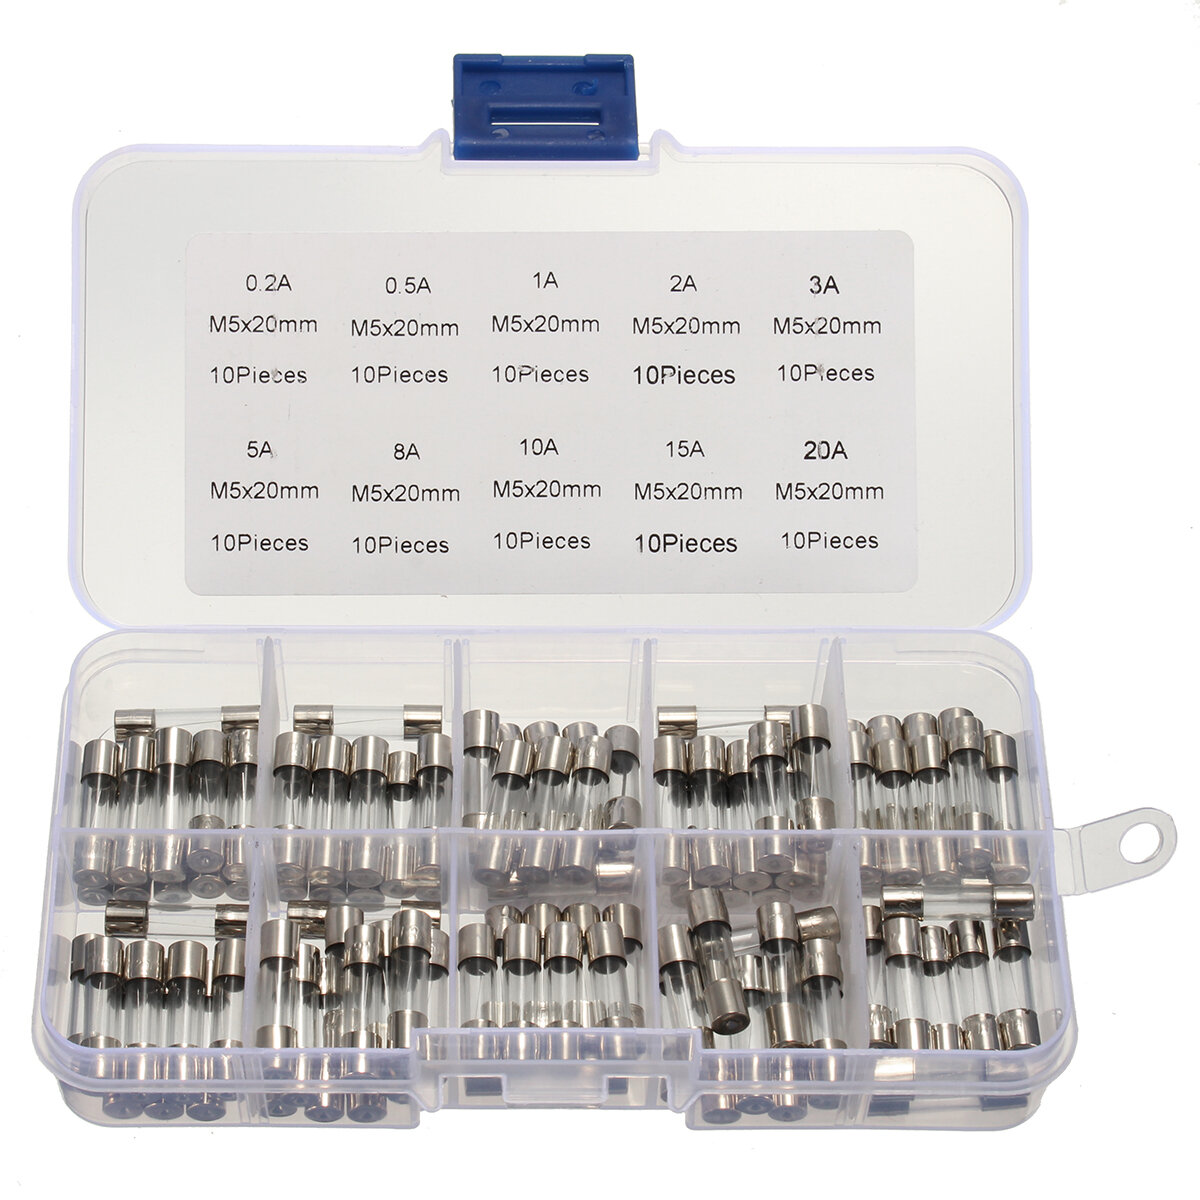 best price,100pcs,5x20mm,0.2a,20a,quick,blow,glass,tube,fuse,kit,coupon,price,discount